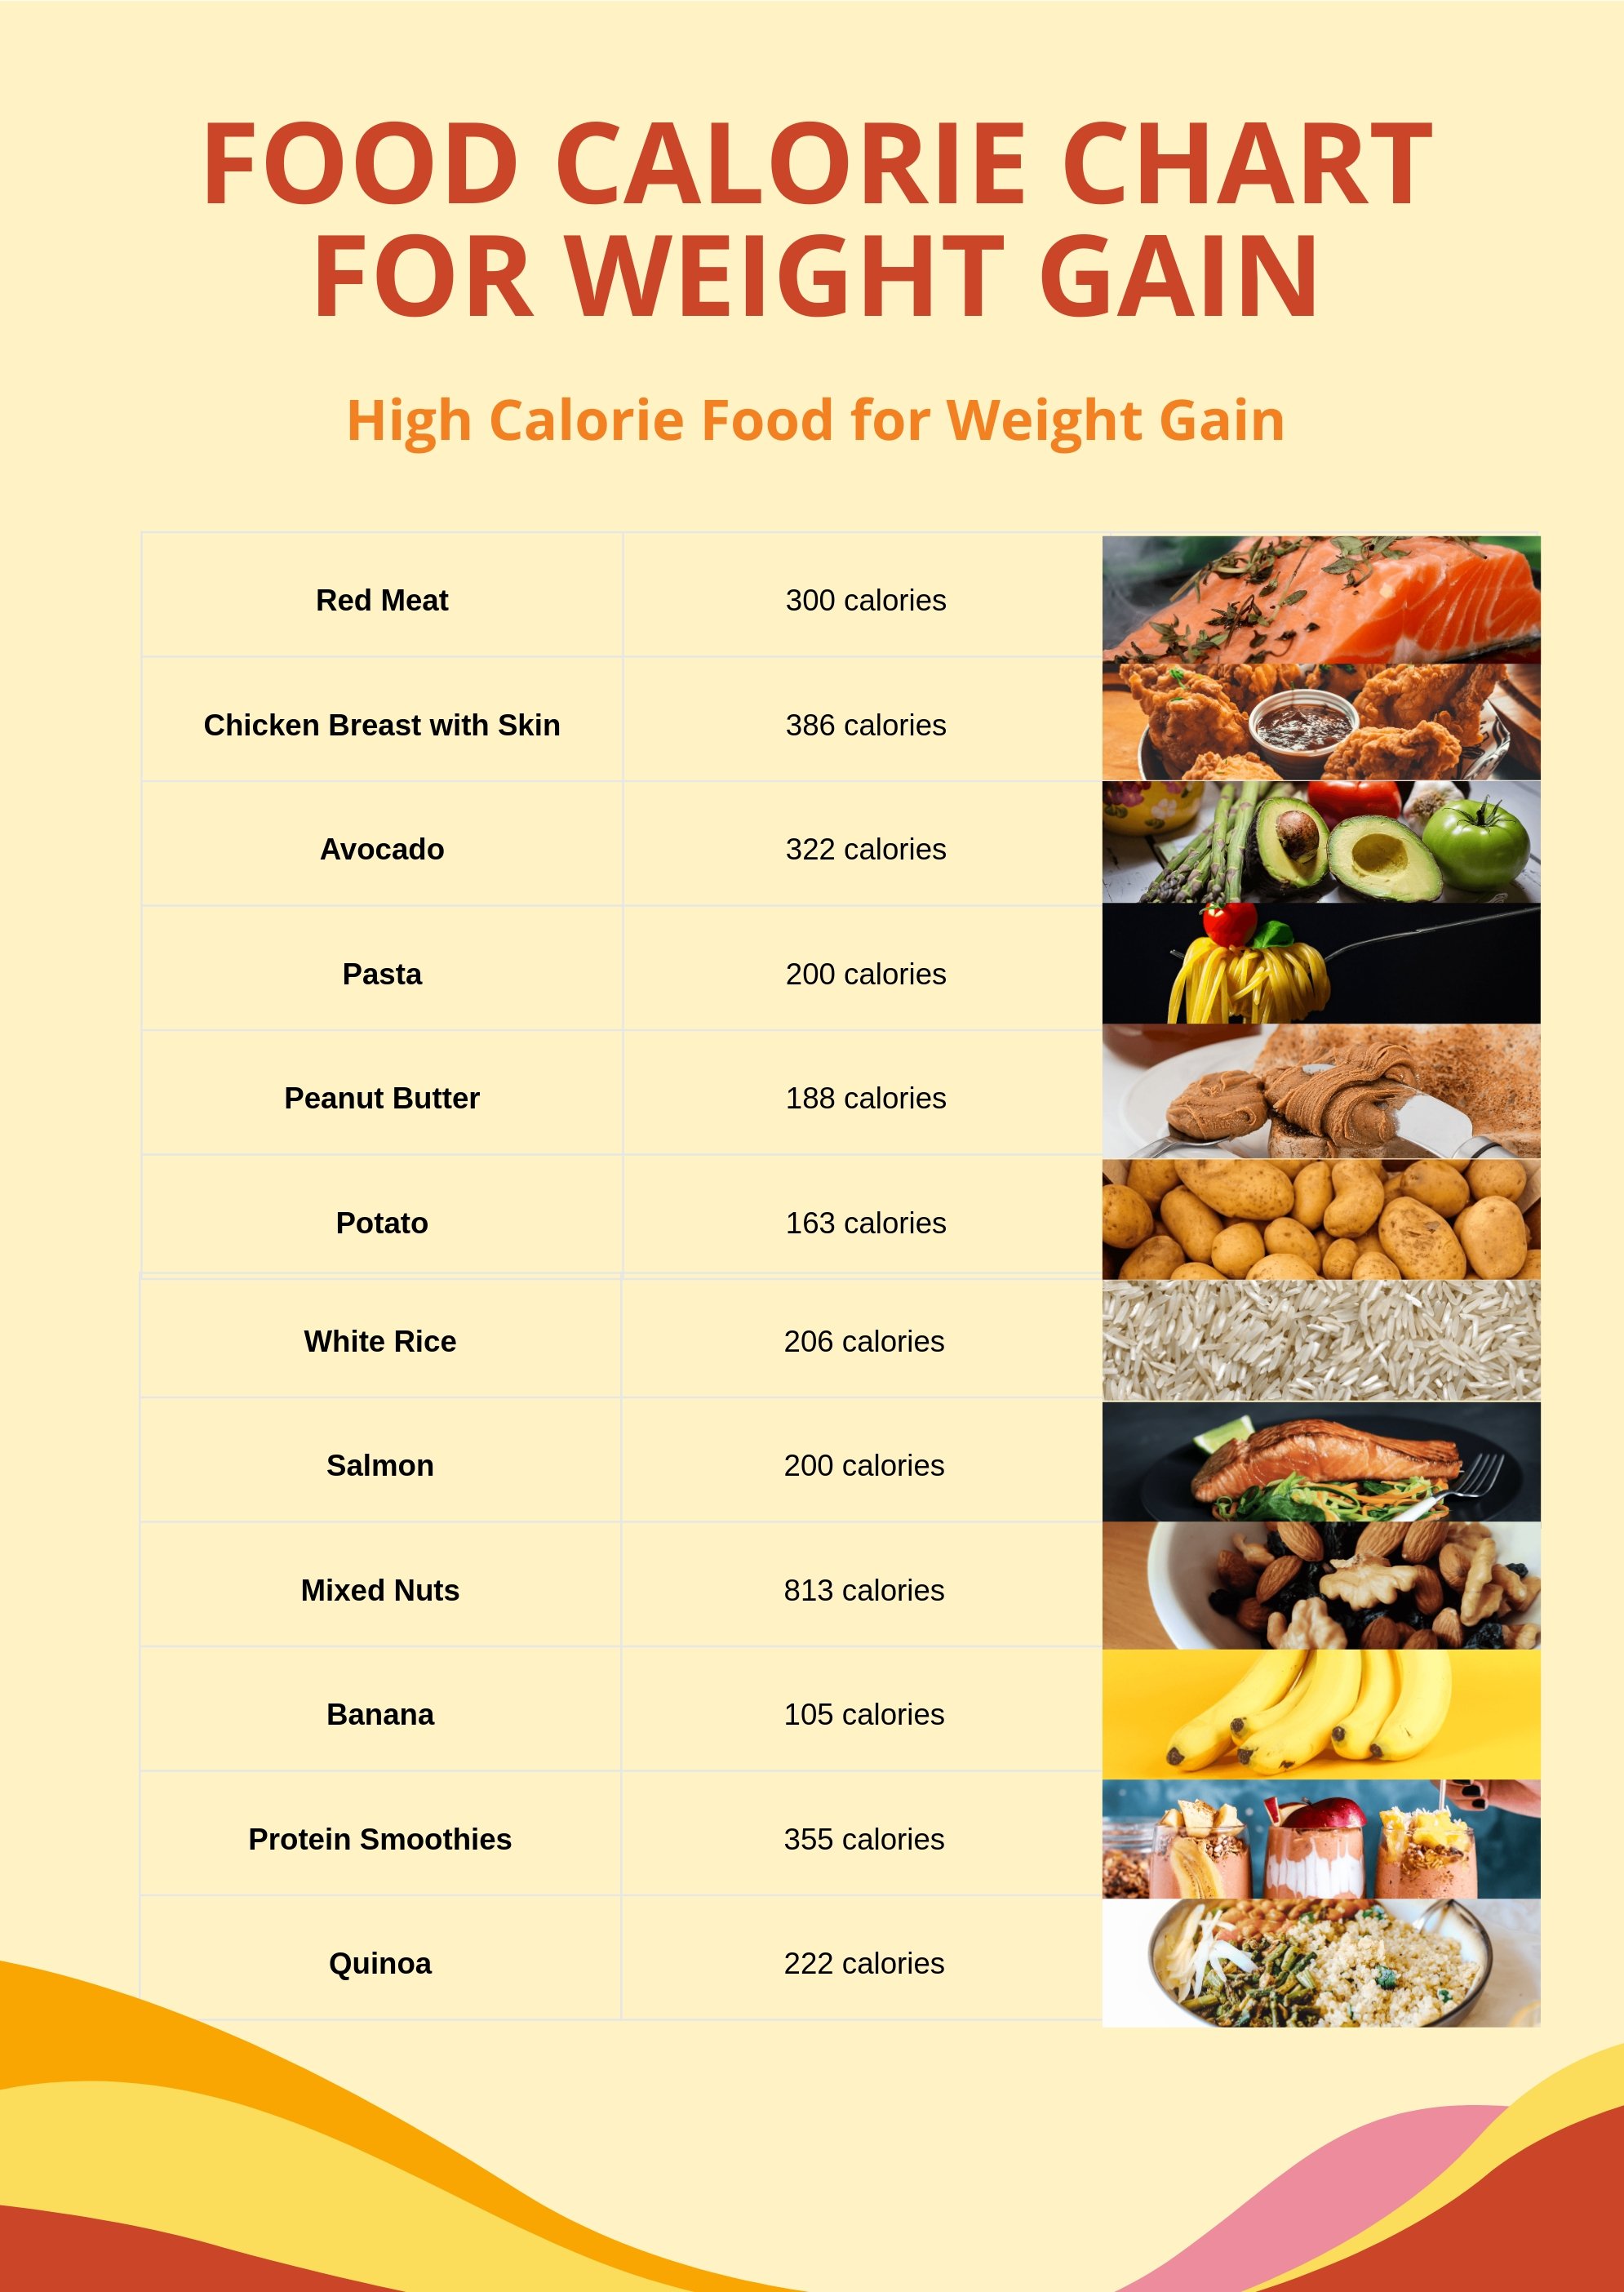 Food Calorie Chart For Weight Gain in PDF, Illustrator